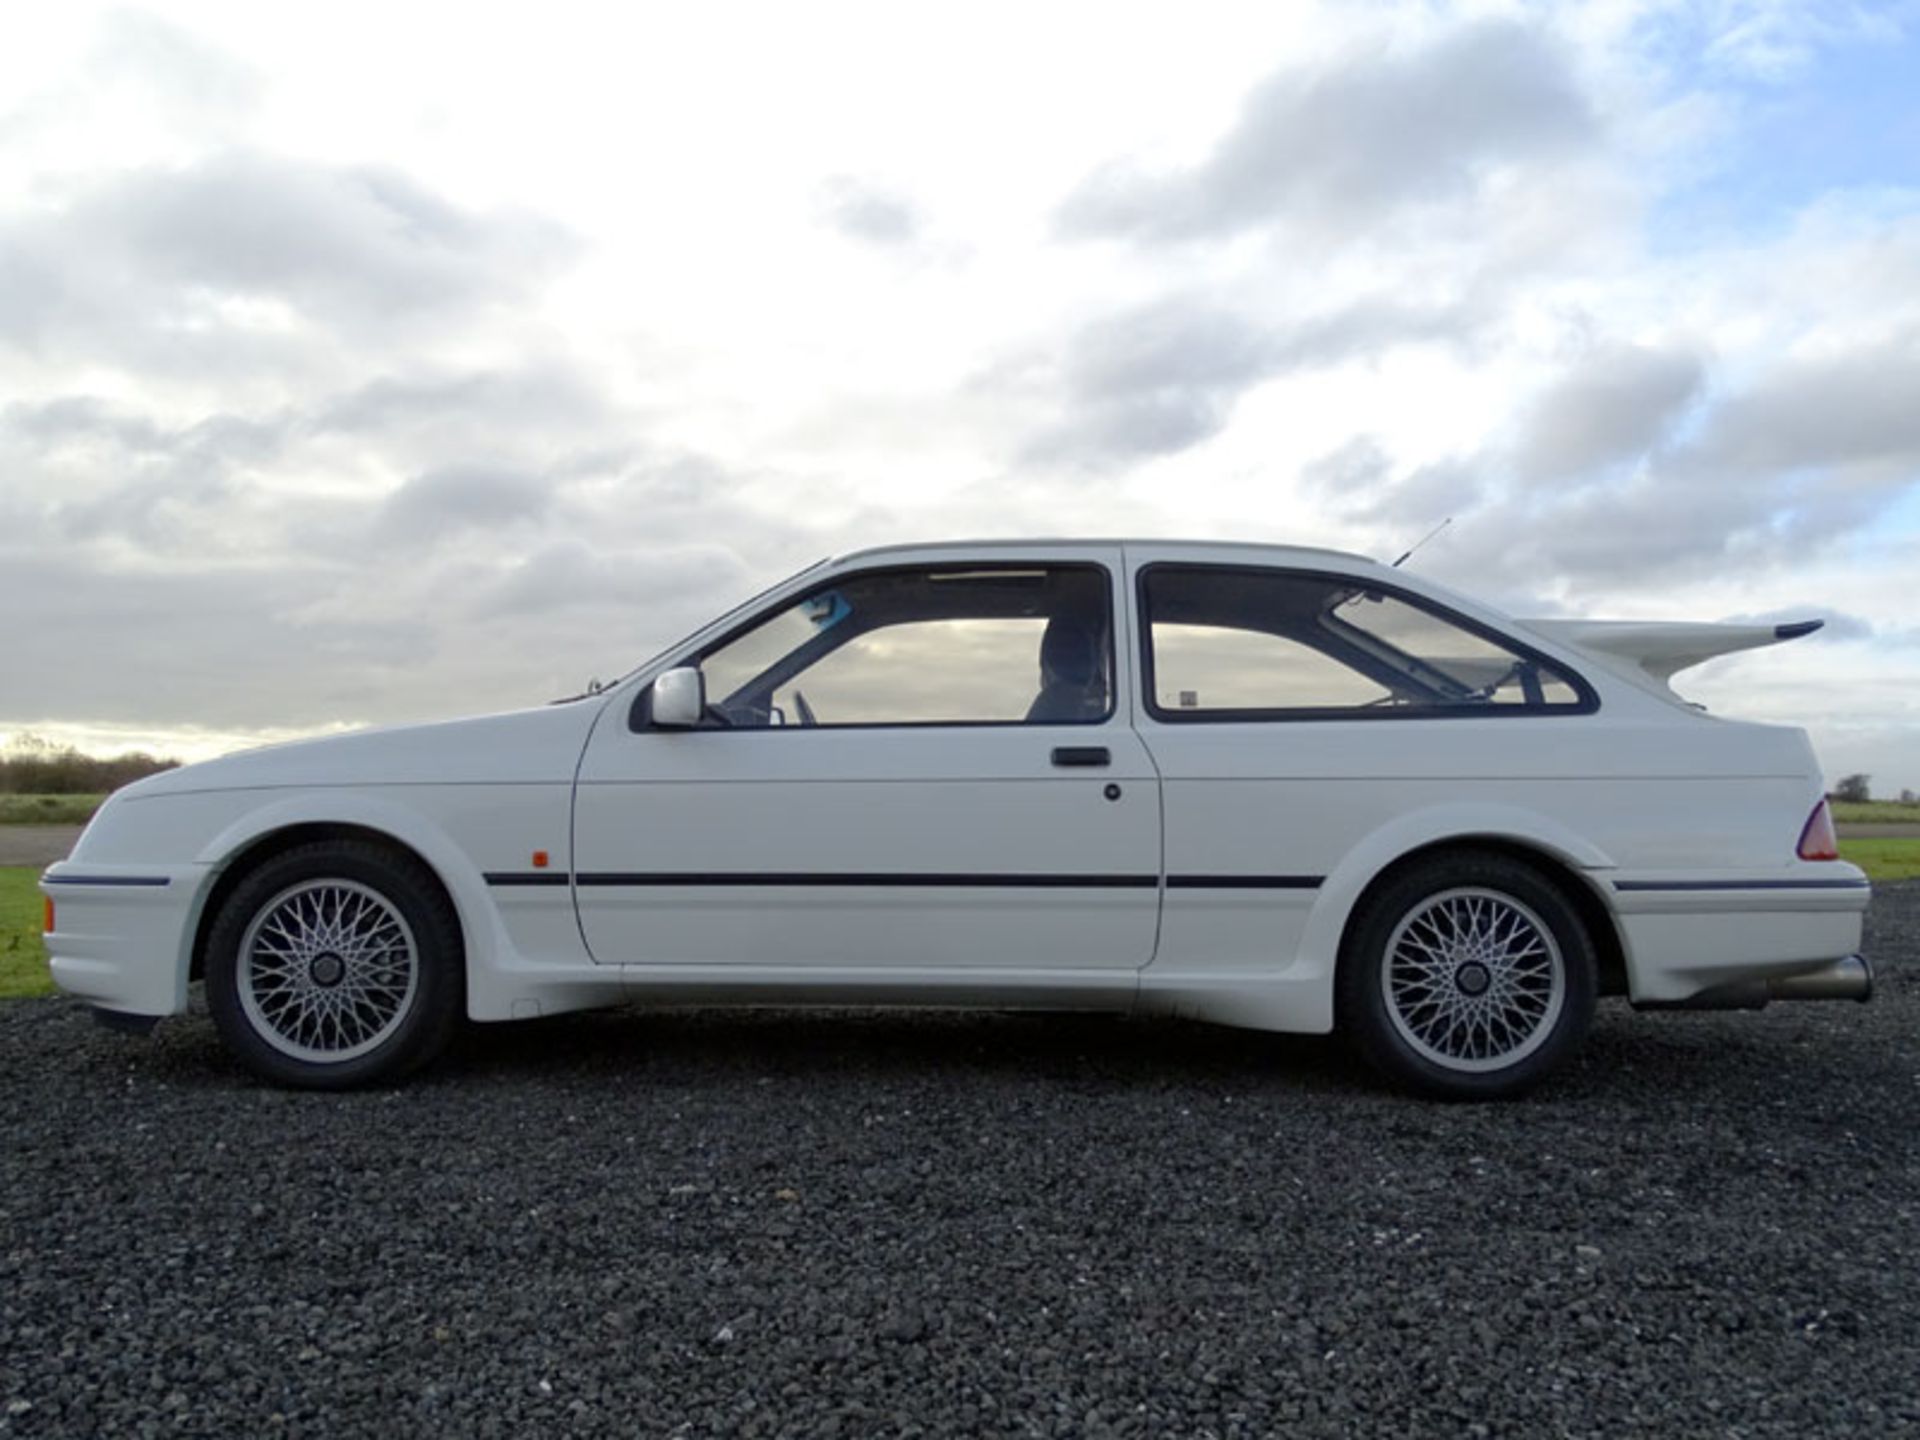 1987 Ford Sierra RS Cosworth - Image 4 of 11